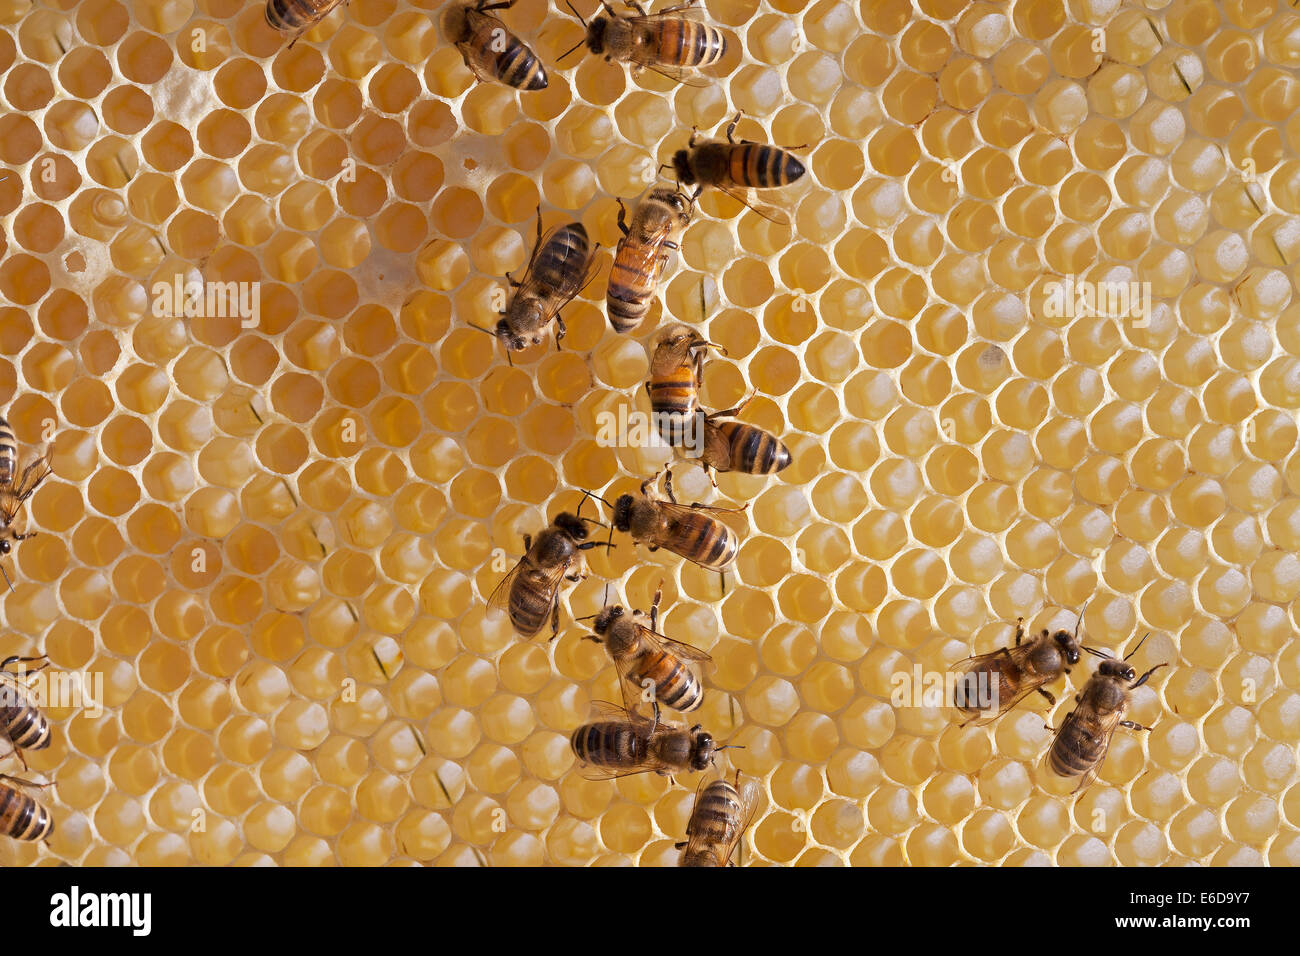 English worker honeybees in hive checking to make sure honey store is ready and capping cells with white beeswax. Hampshire, UK Stock Photo